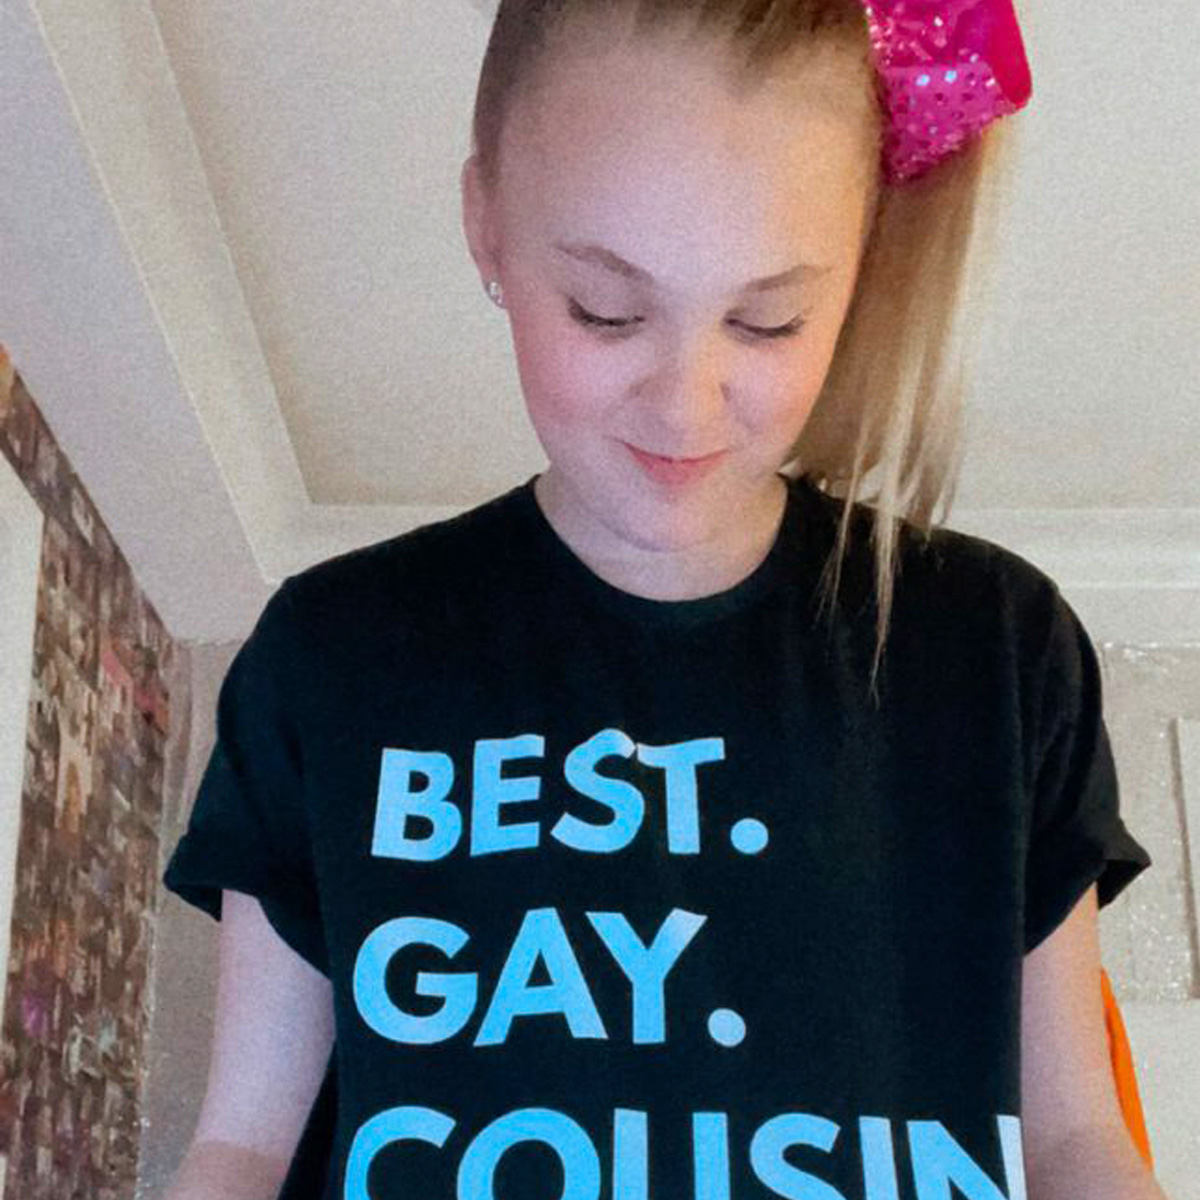 Jojo Siwa apparently comes out with the “Best gay cousin” T-shirt